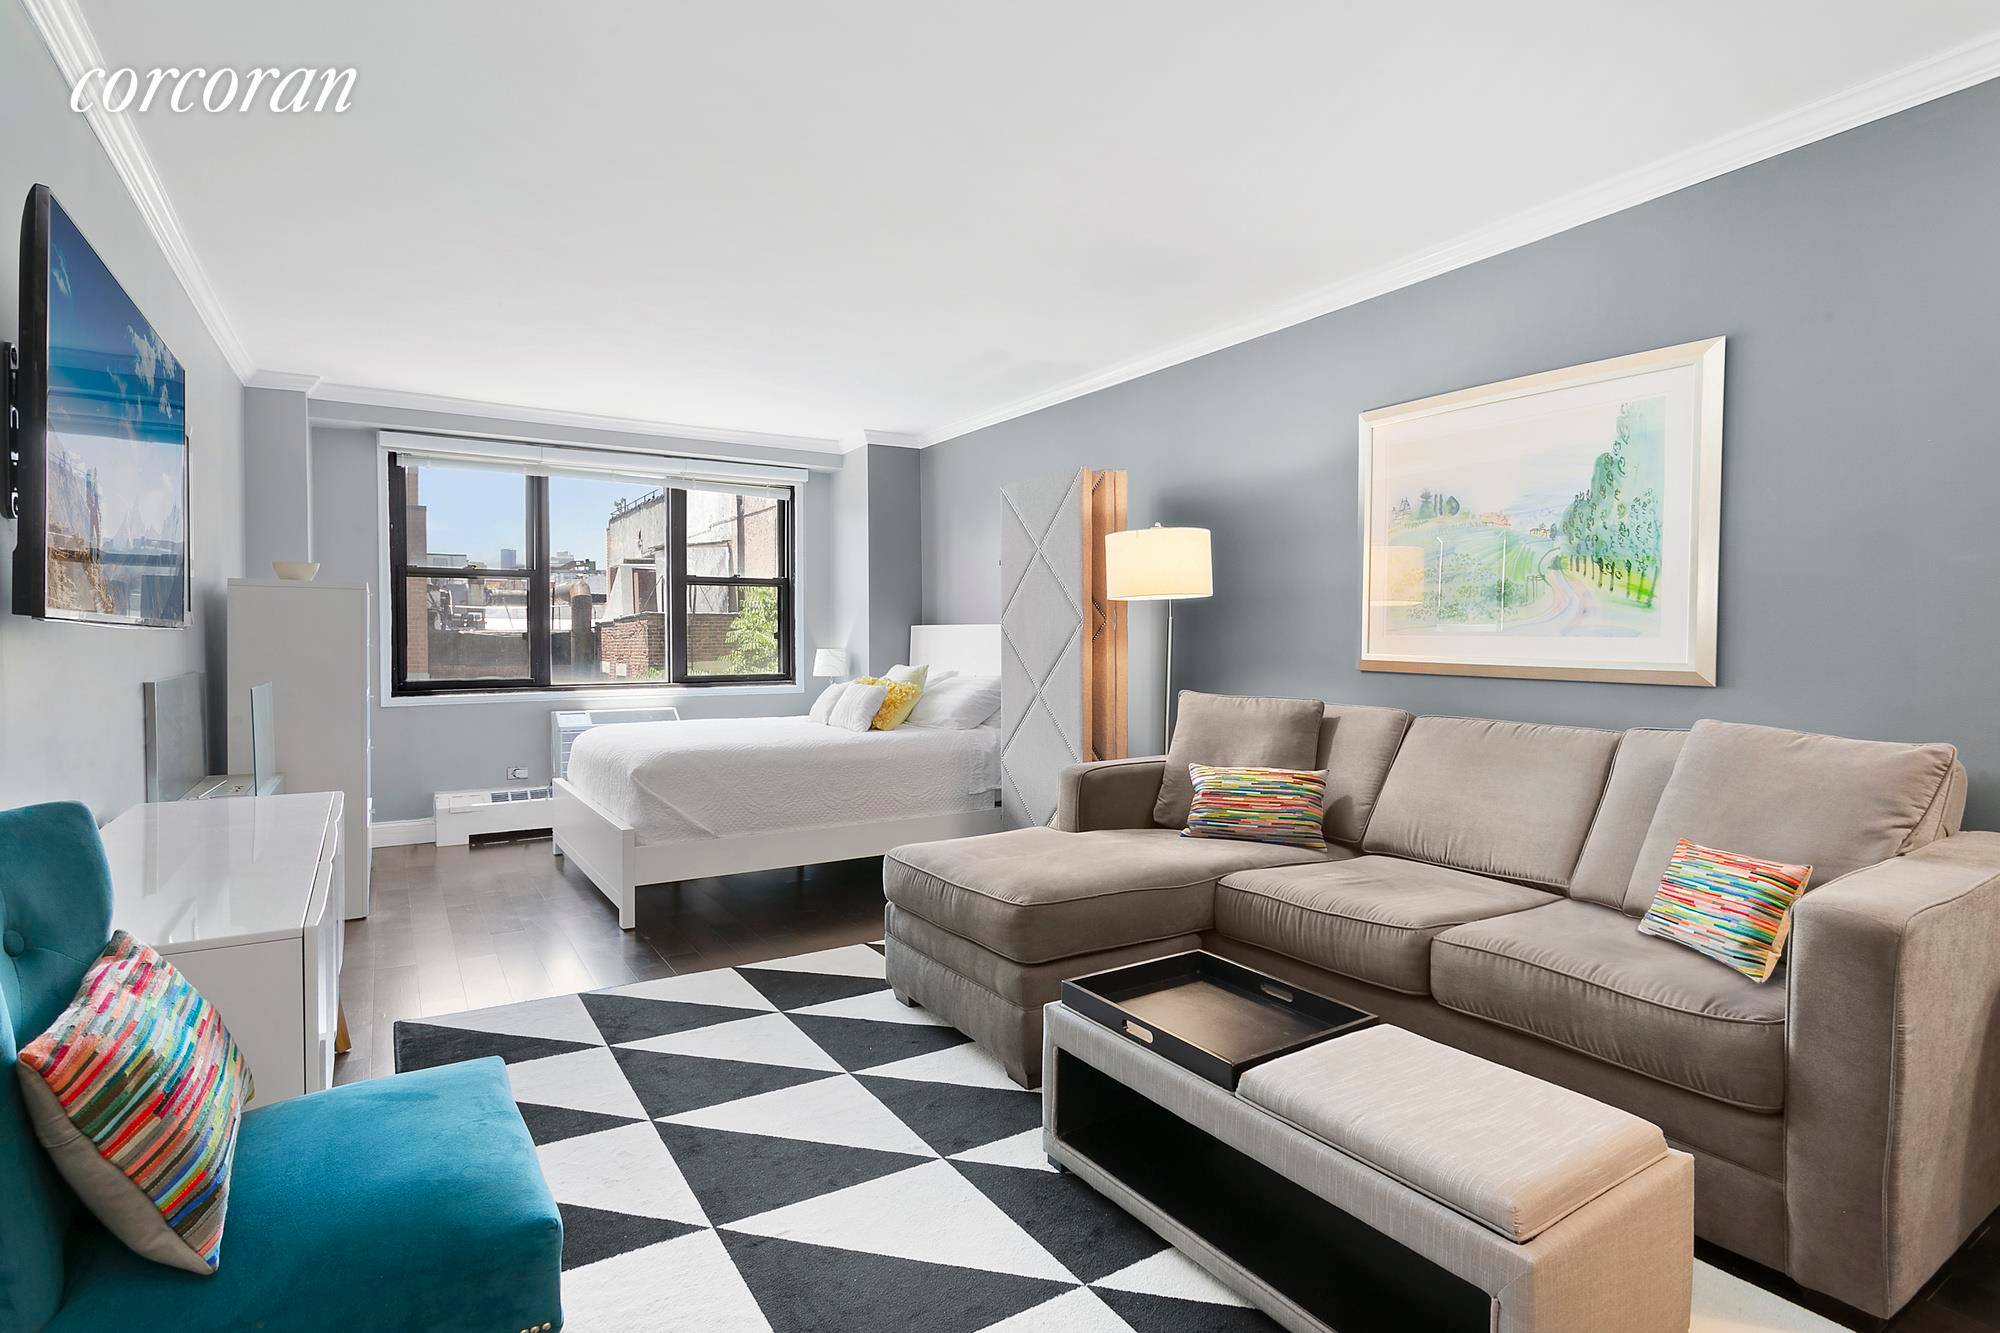 Nestled on a tree lined block right across from Stuyvesant Square Park sits this perfectly renovated studio apartment in a full service doorman building.